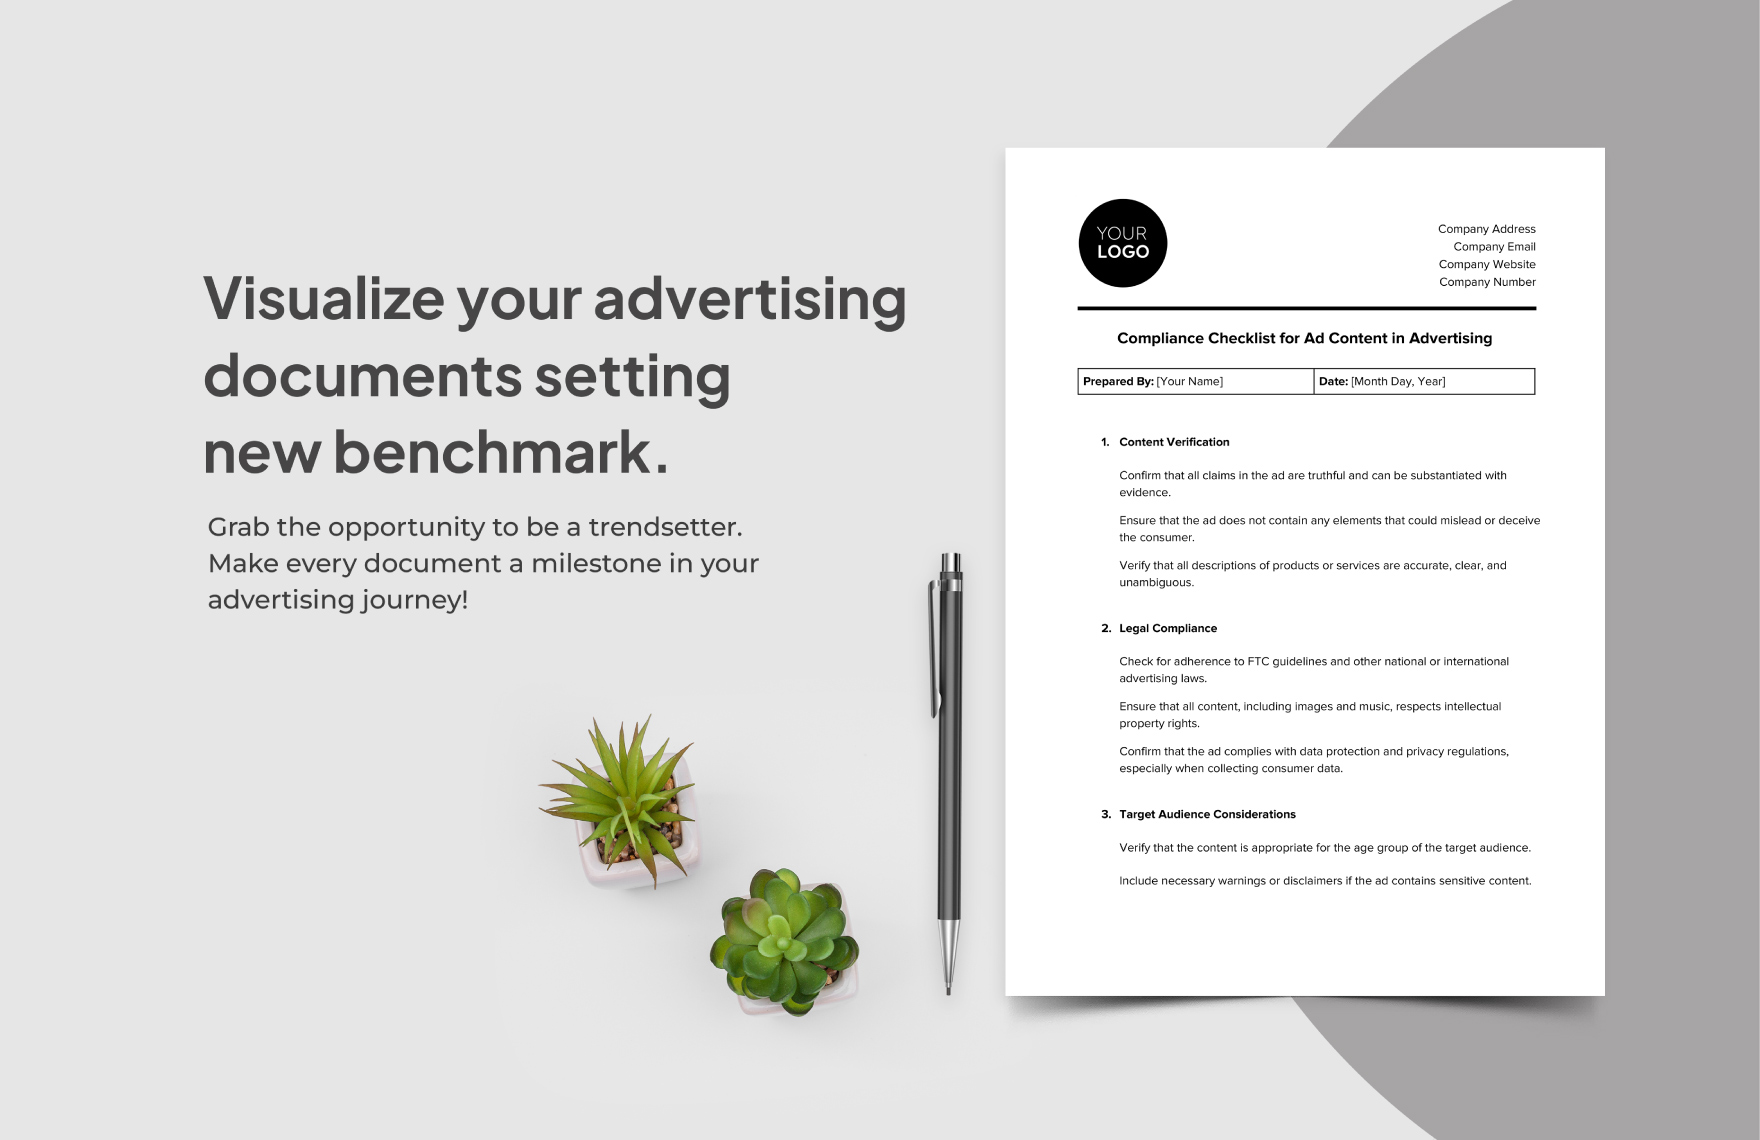 Compliance Checklist for Ad Content in Advertising Template